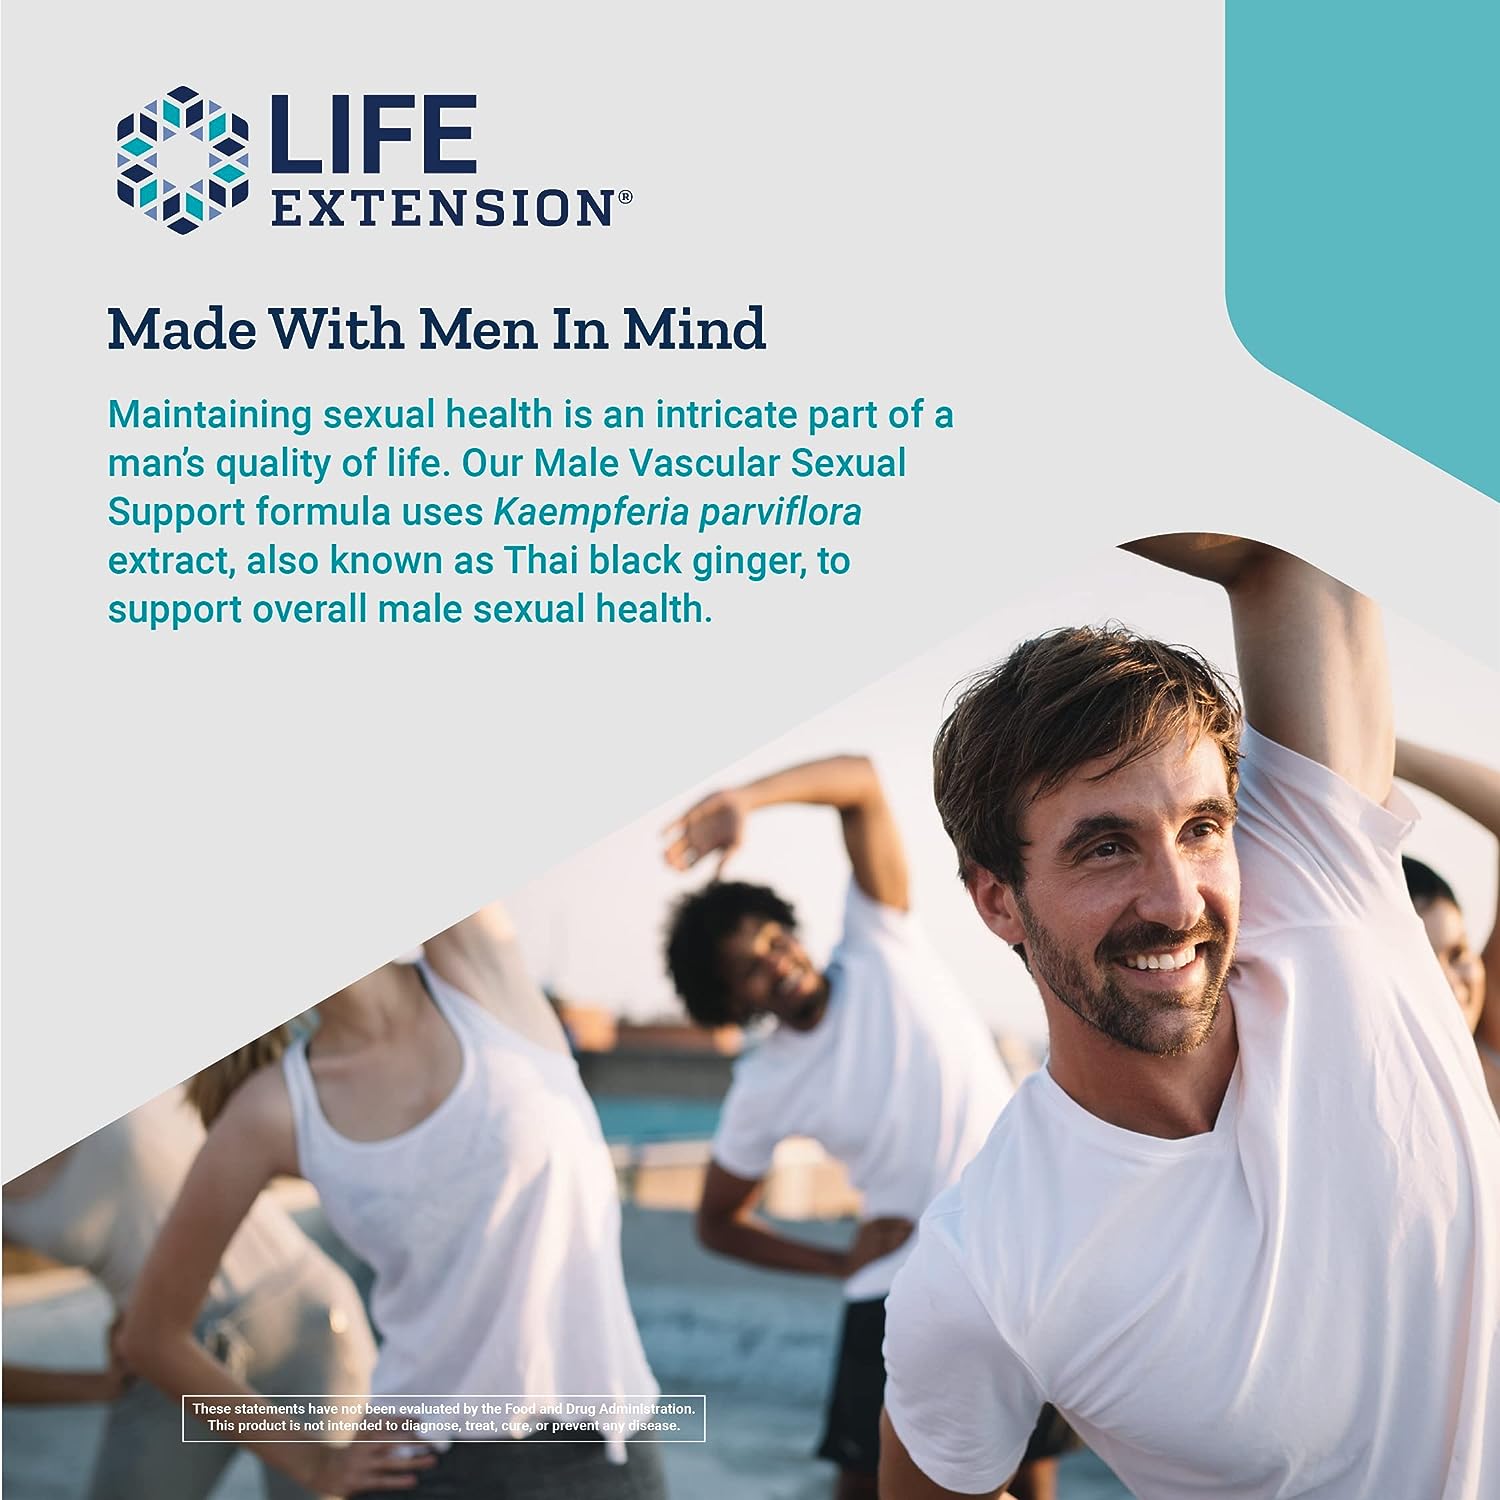 Image explaining Life Extension Male Vascular Sexual Support is made with men in mind